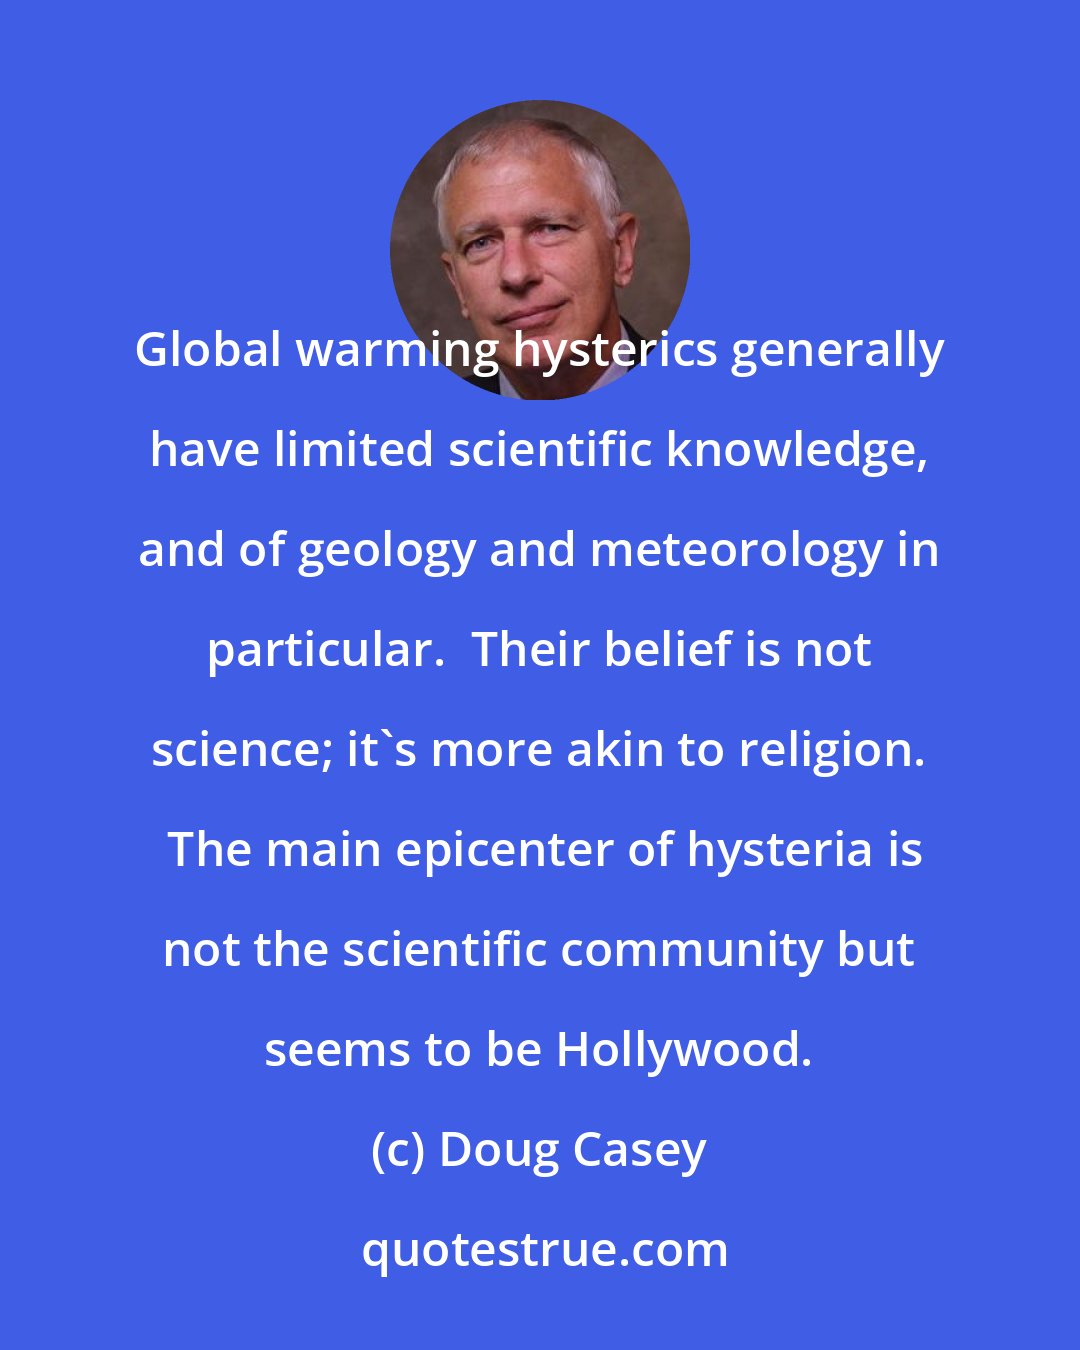 Doug Casey: Global warming hysterics generally have limited scientific knowledge, and of geology and meteorology in particular.  Their belief is not science; it's more akin to religion.  The main epicenter of hysteria is not the scientific community but seems to be Hollywood.